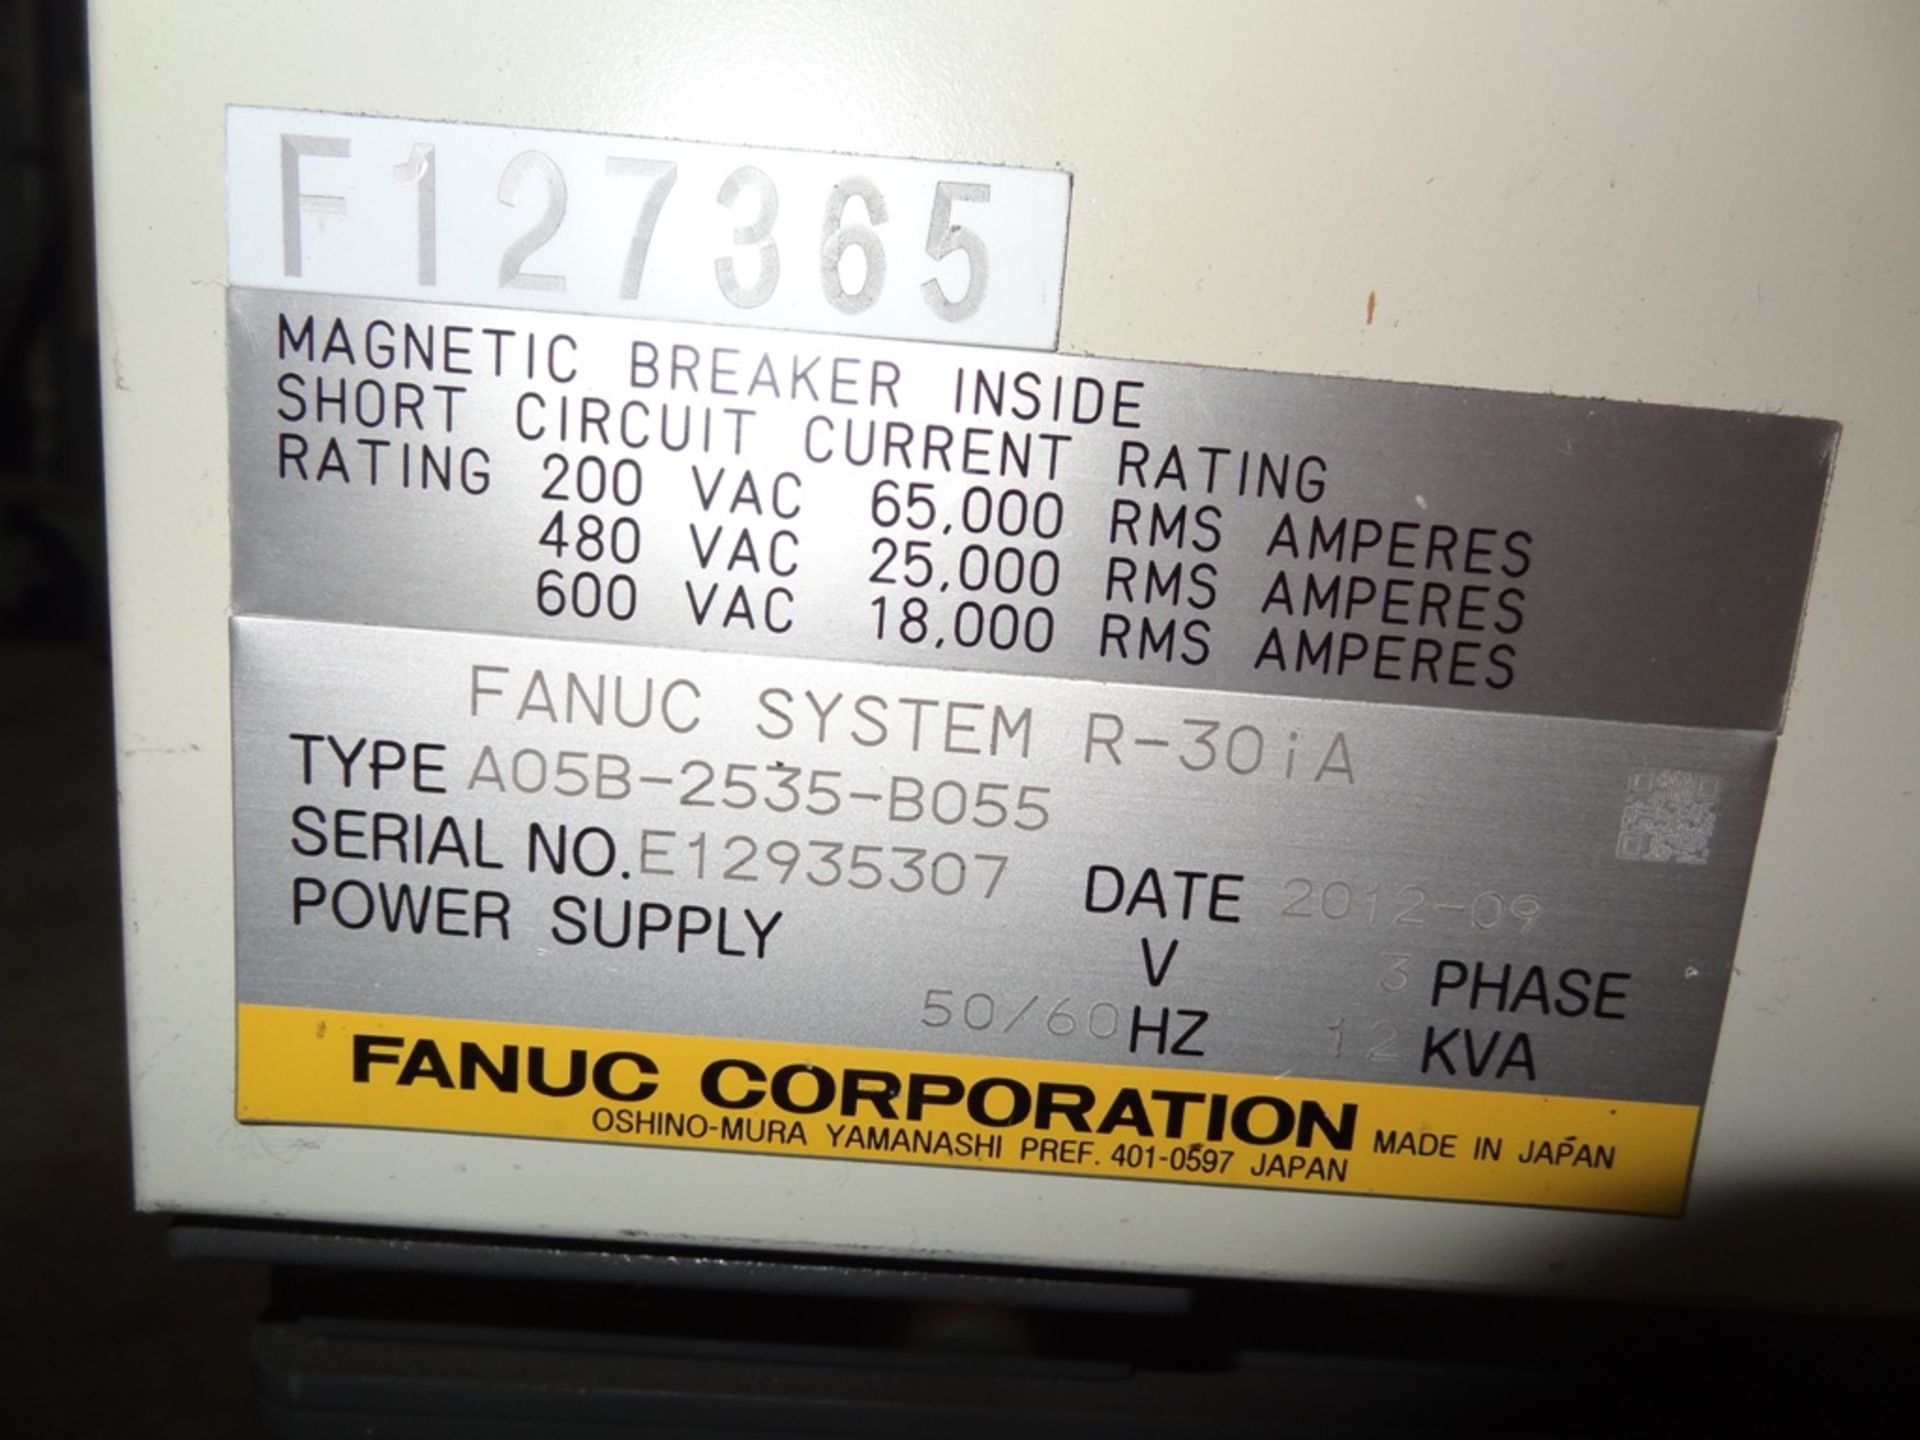 FANUC R2000iB/210F WITH R-30iA, CABLES, COLOR TEACH PEND, SN 127365, YEAR, HOURS 6841, LOCATION MI - Image 11 of 11